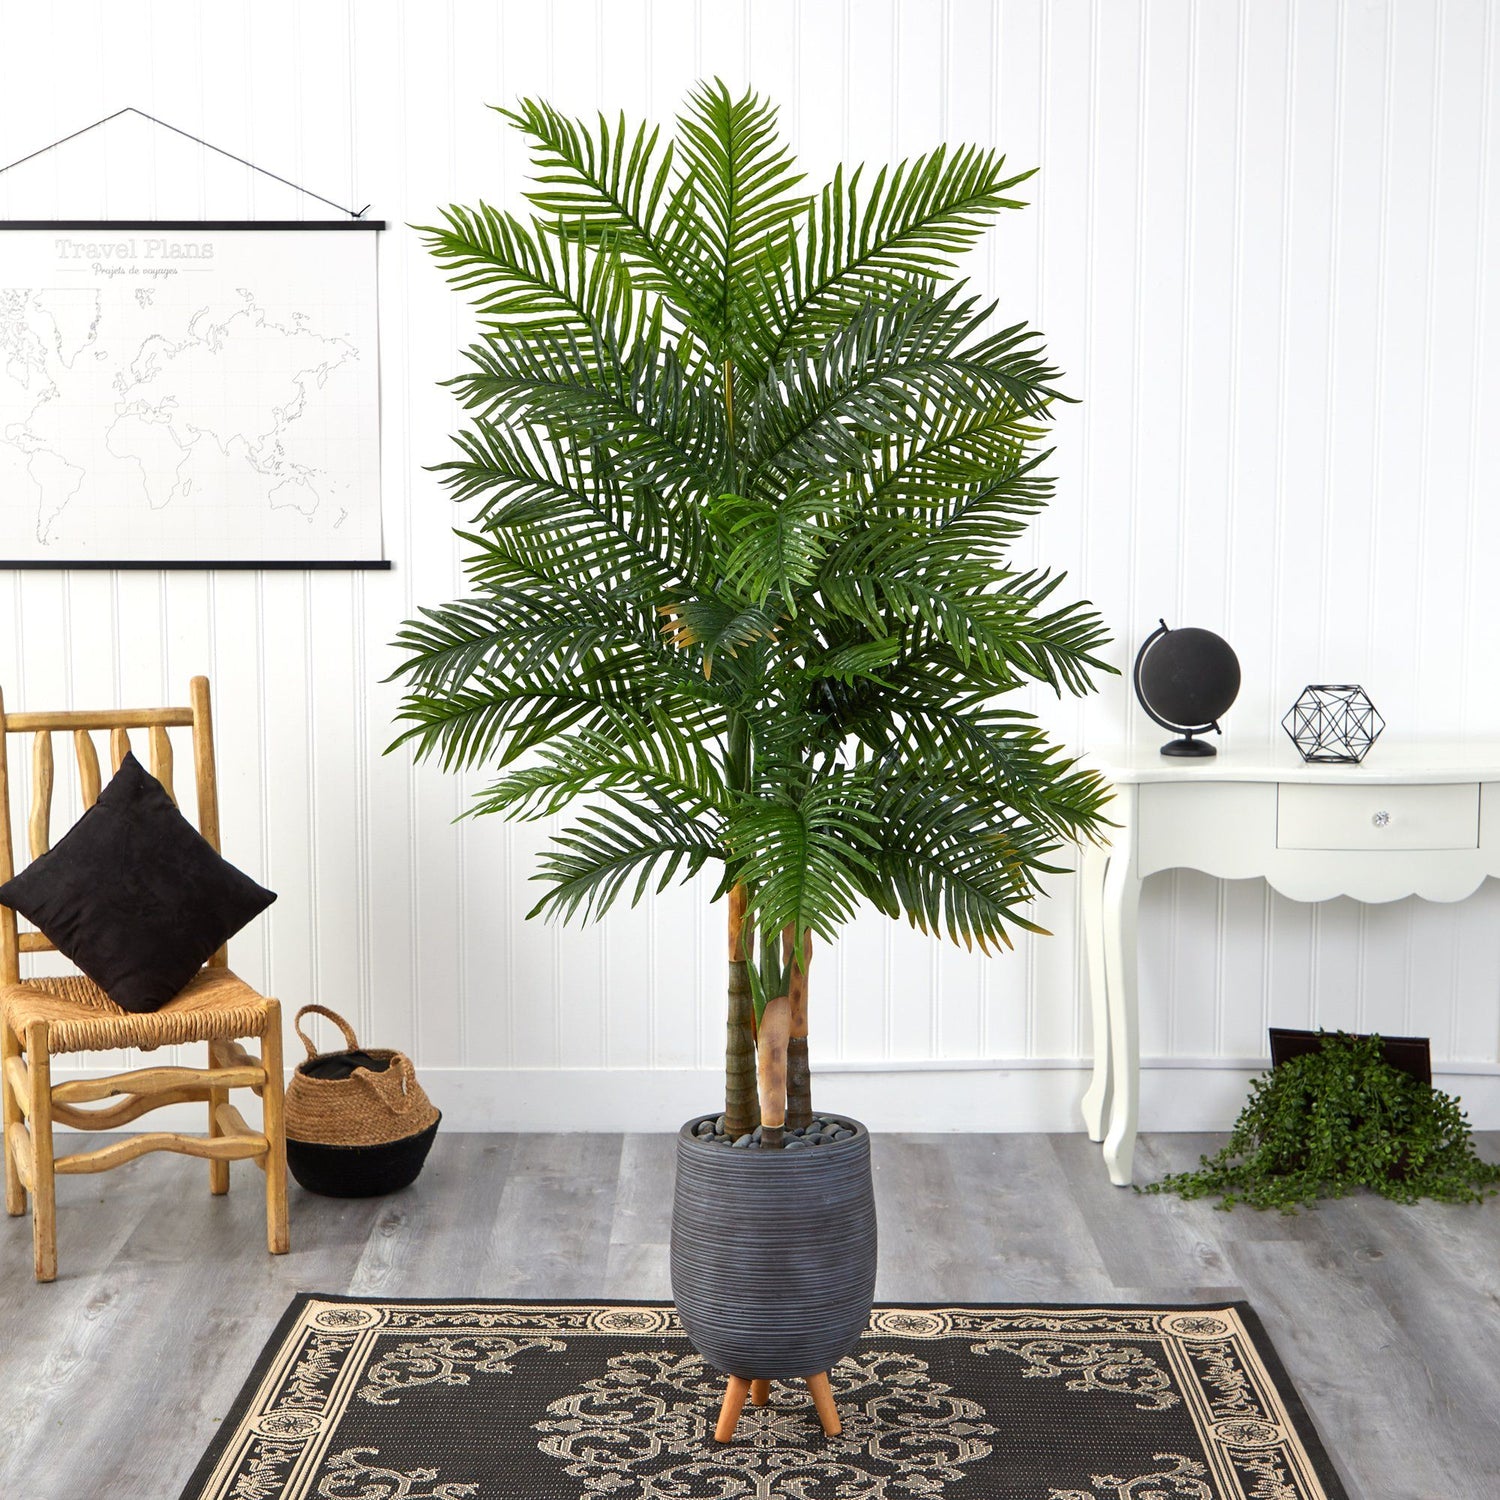 6’ Areca Palm Artificial Tree in Gray Planter with Stand (Real Touch)